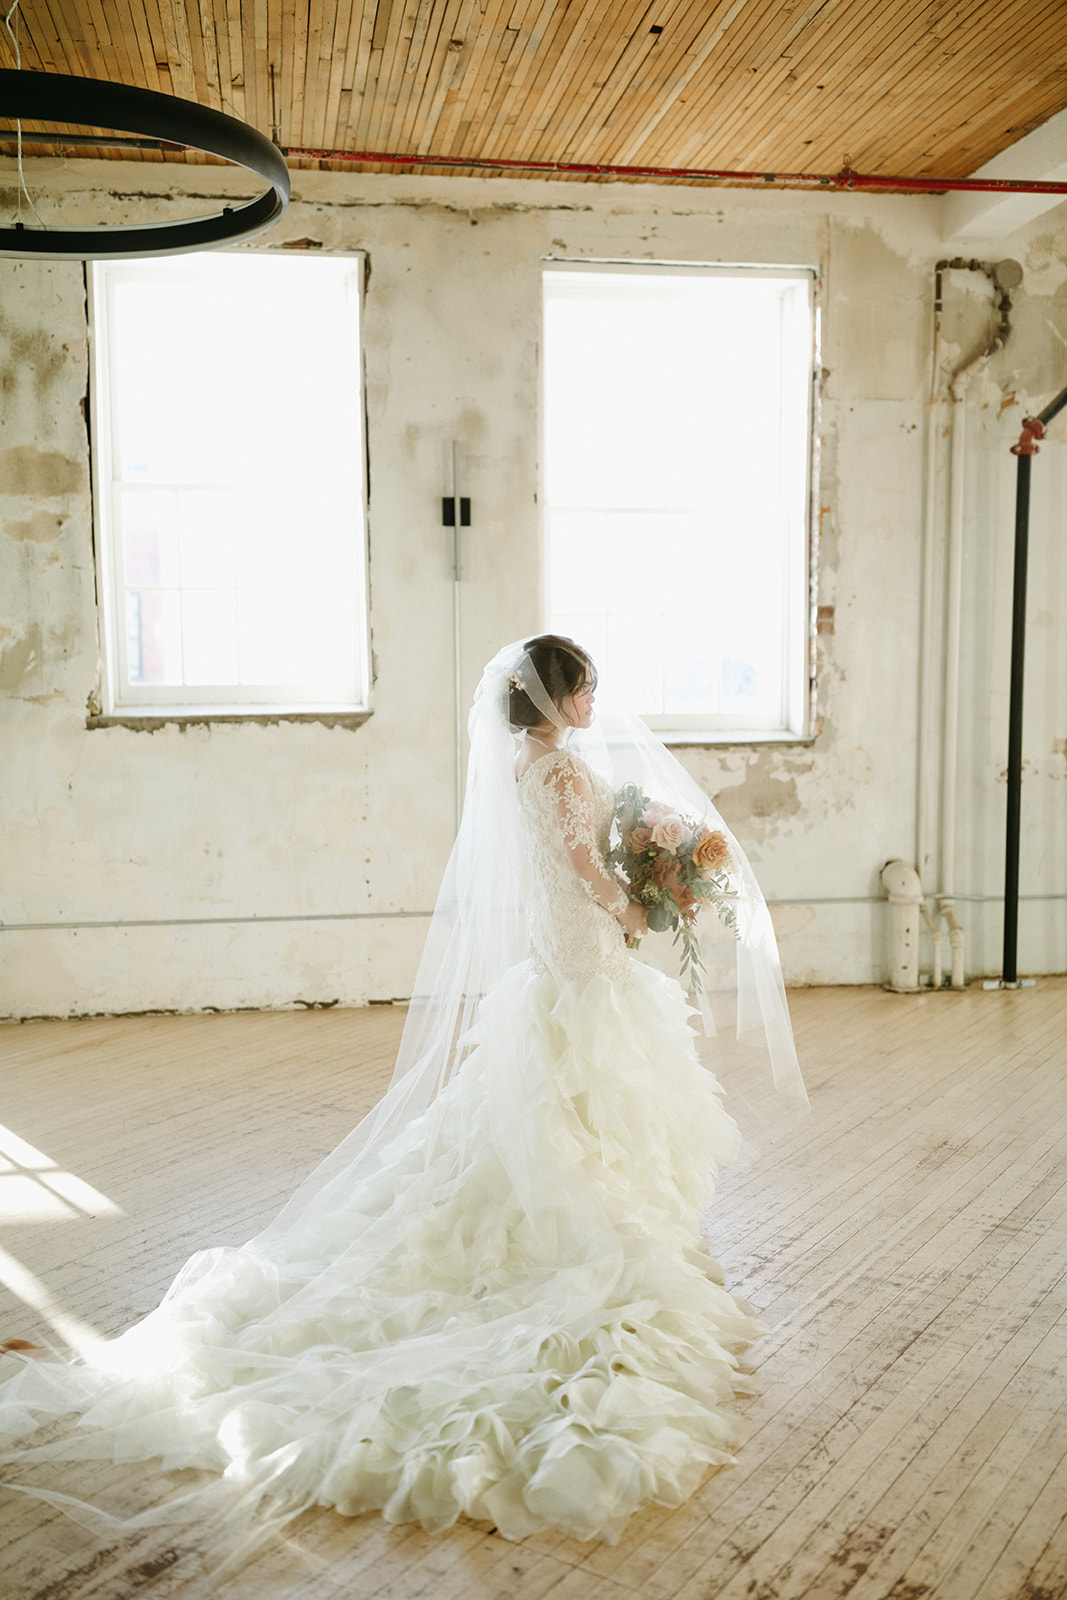 Bridal portrait inspiration, unique ruffled bridal gown with boho chic style